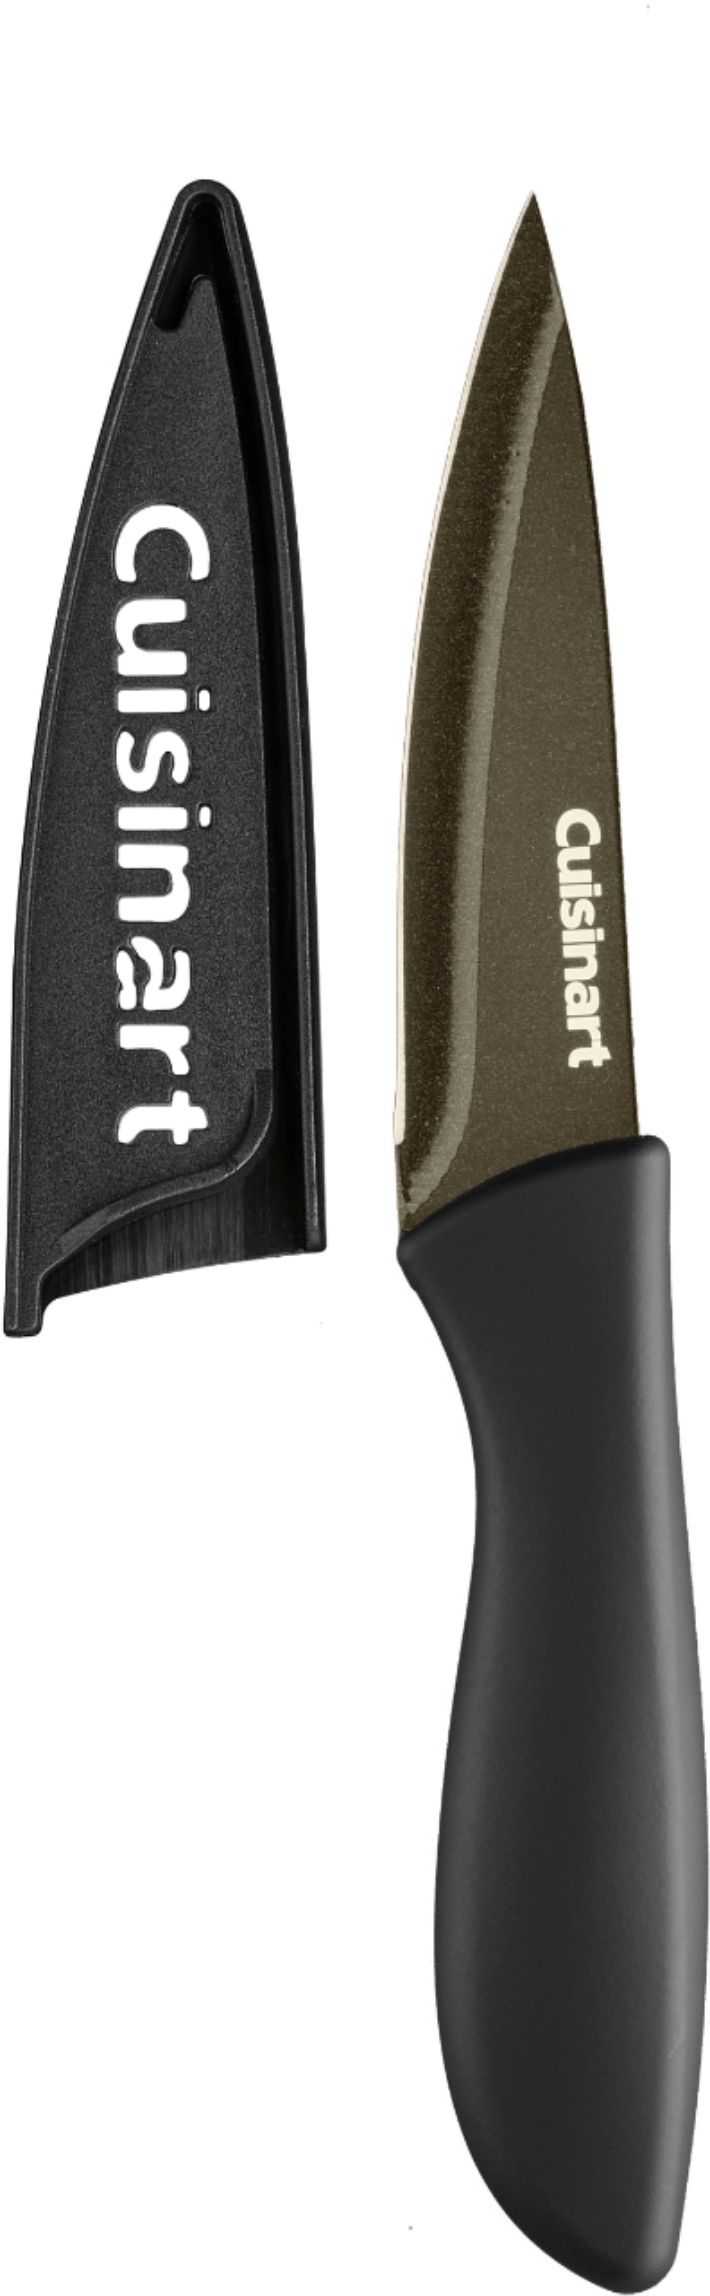 Best Buy: Cuisinart 12pc Coated Knife Set with Blade Guards Black ...